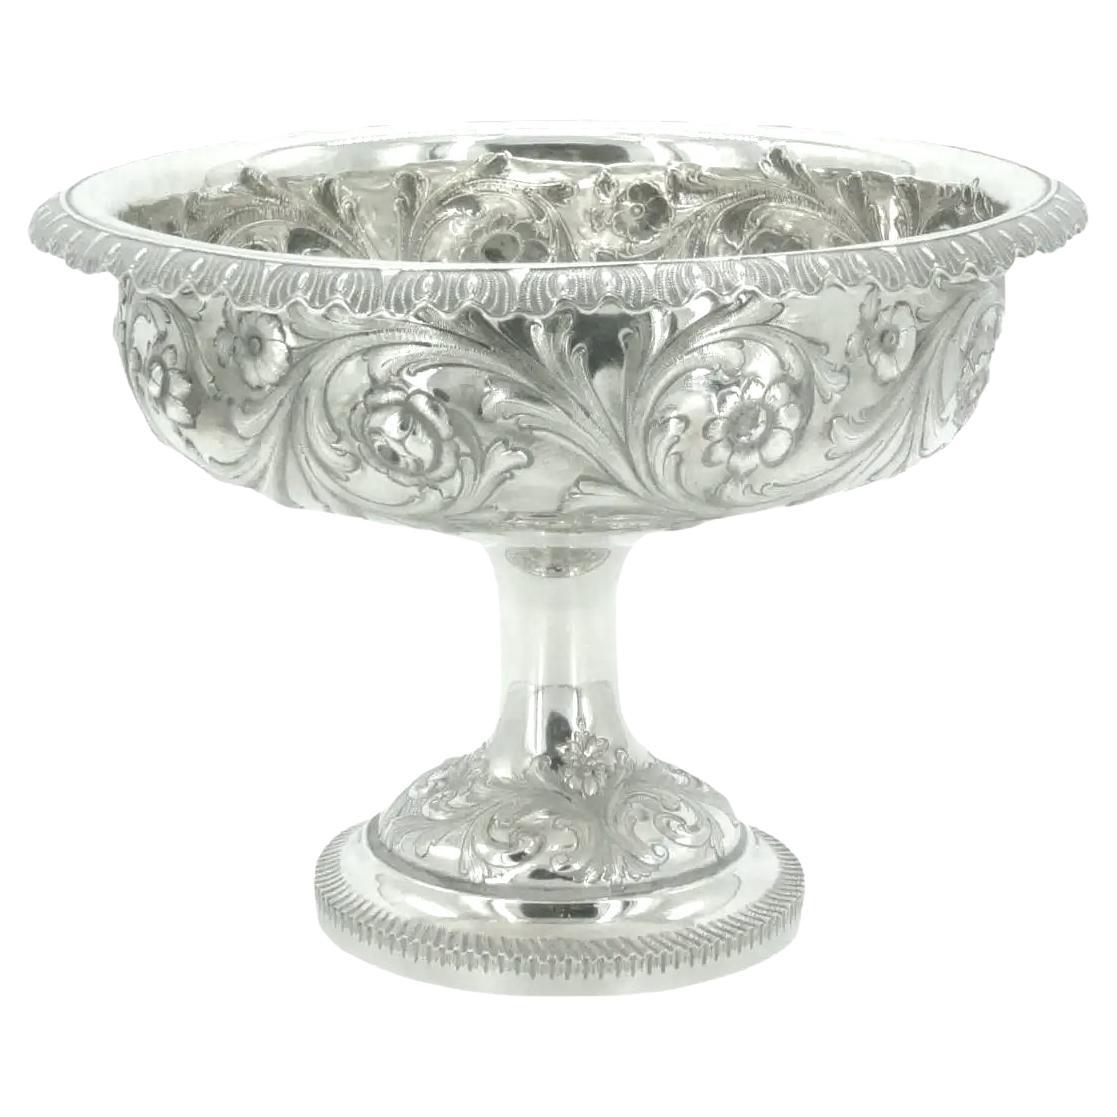 Sterling Silver Footed Centerpiece Bowl